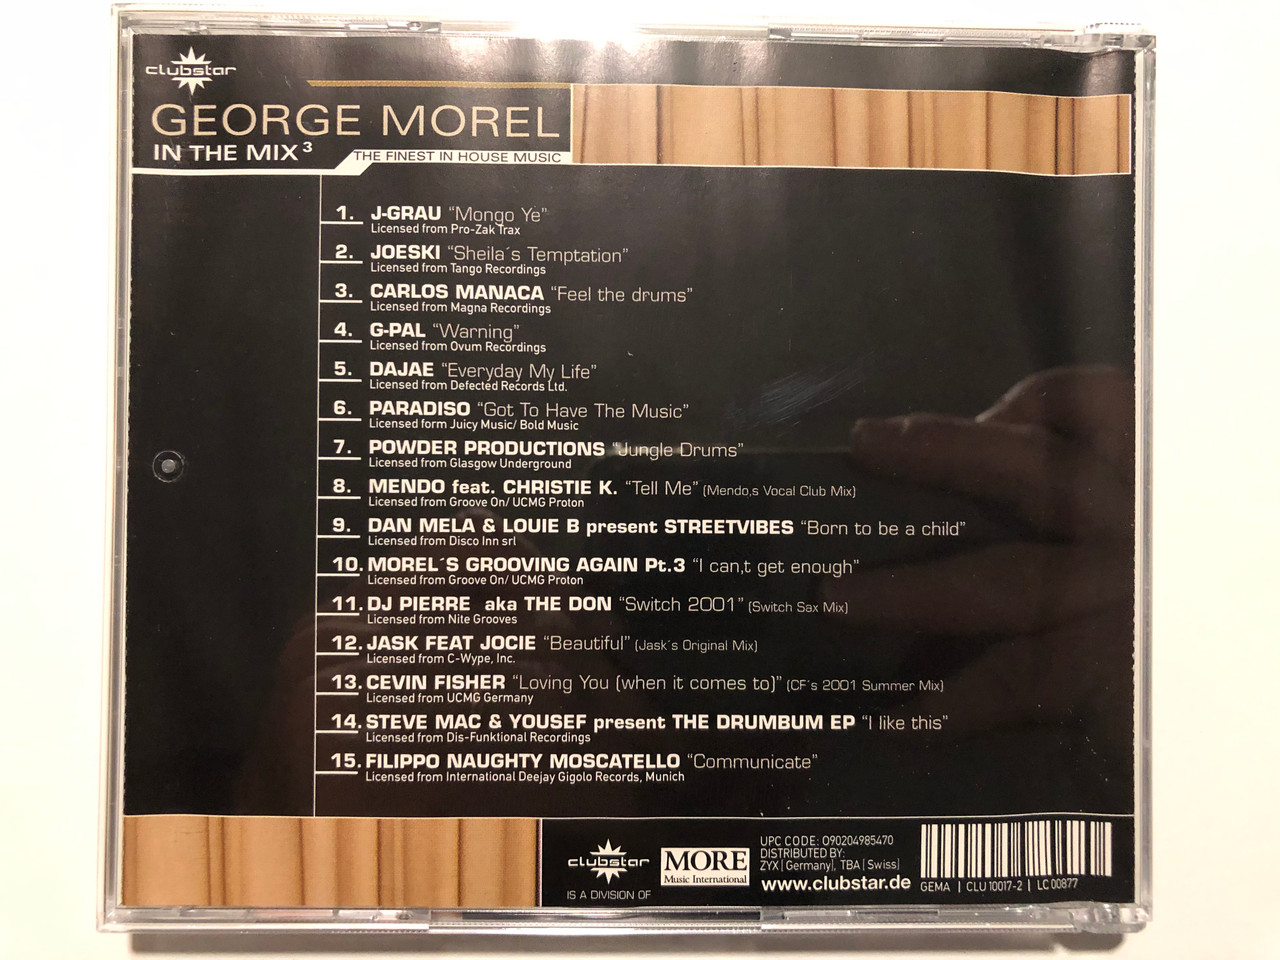 https://cdn10.bigcommerce.com/s-62bdpkt7pb/products/29847/images/177528/George_Morel_In_The_Mix_The_Finest_In_House_Music_Clubstar_Audio_CD_CLU_10017-2_4__54644.1620283834.1280.1280.JPG?c=2&_ga=2.117550153.1561355153.1620311476-427177752.1620311476